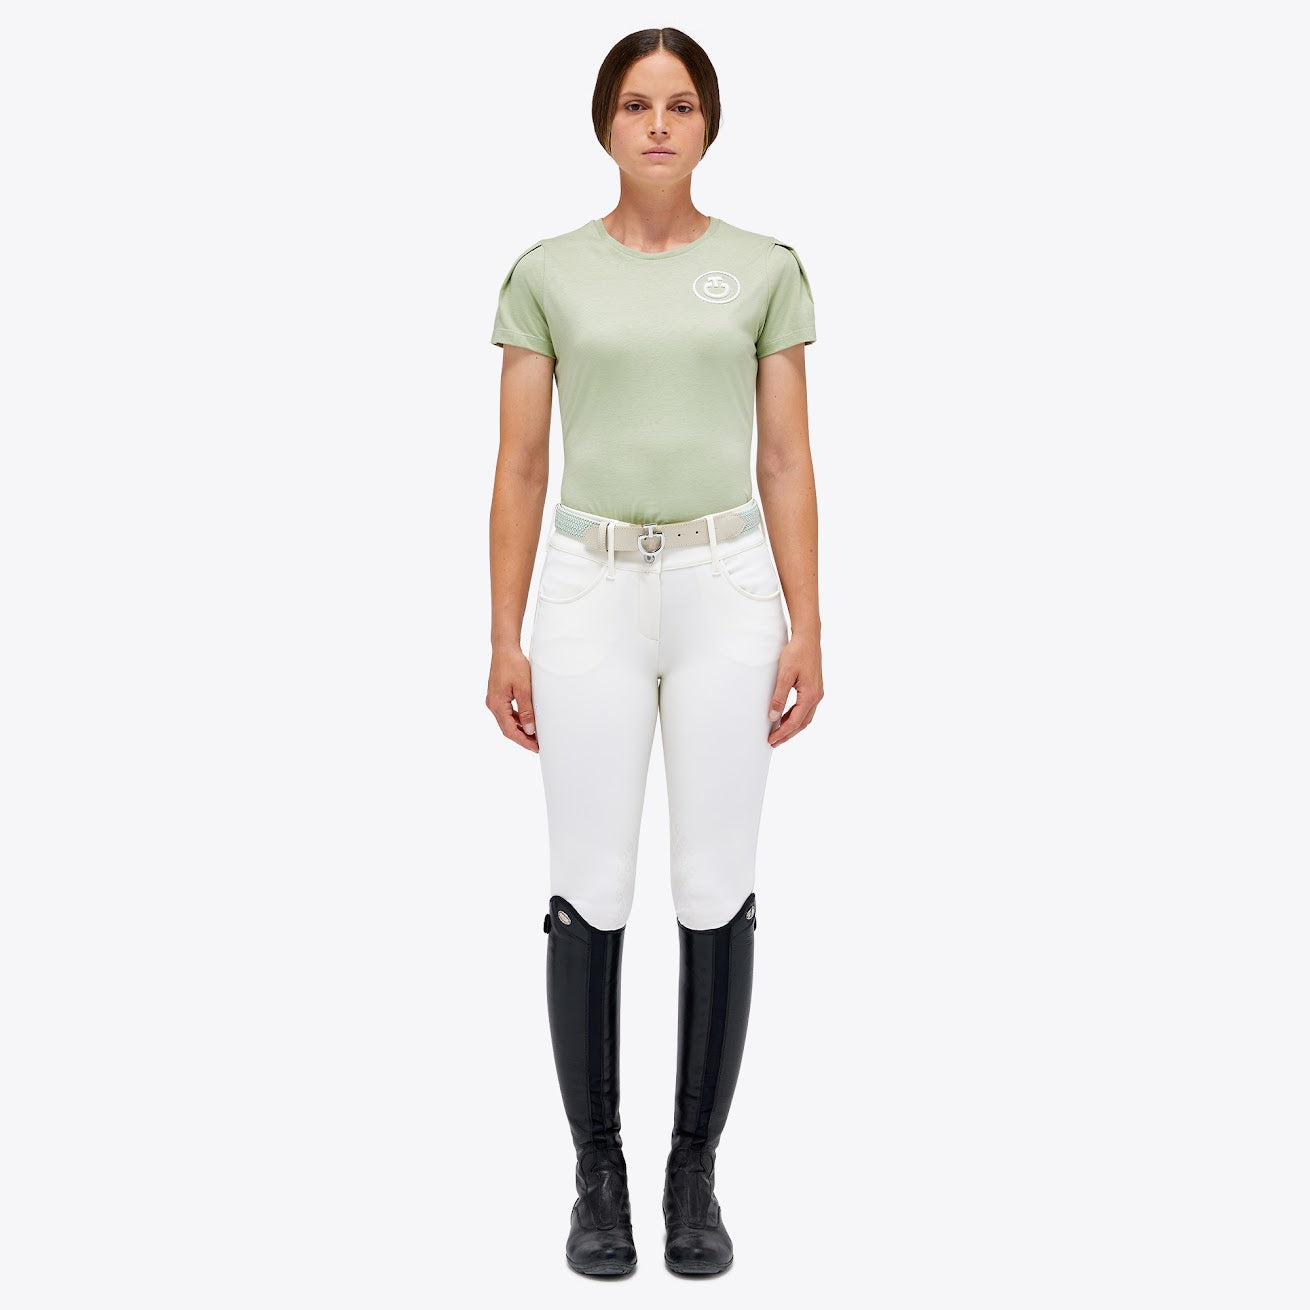 The stunning cotton puff sleeve emblem T shirt by Cavalleria Toscana in green. With a subtle pleating on the short sleeves and finished with an embroidered raised white emblem on the chest.